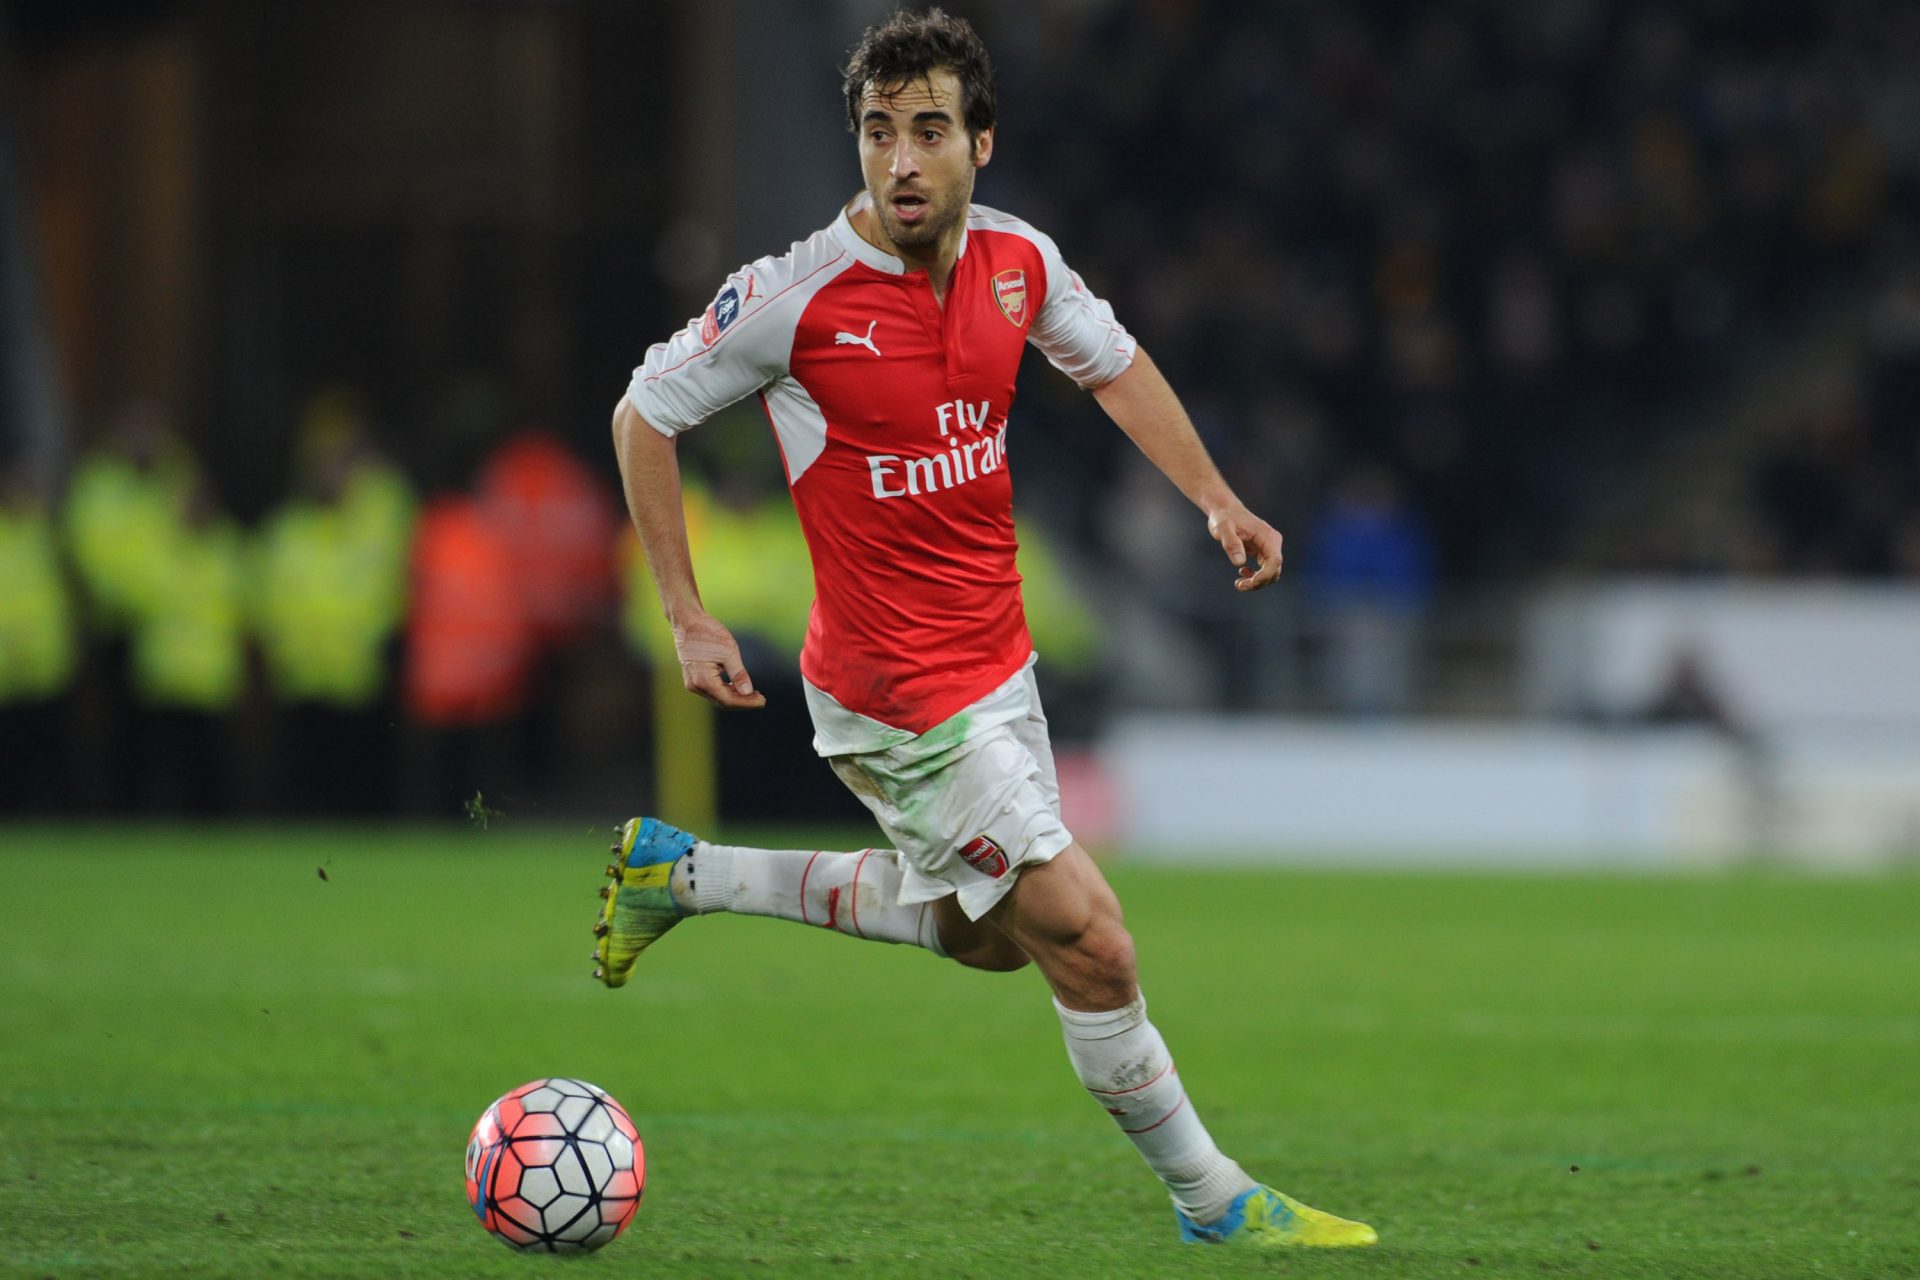 Mathieu Flamini: The former Arsenal player whose billion-dollar empire could save the world